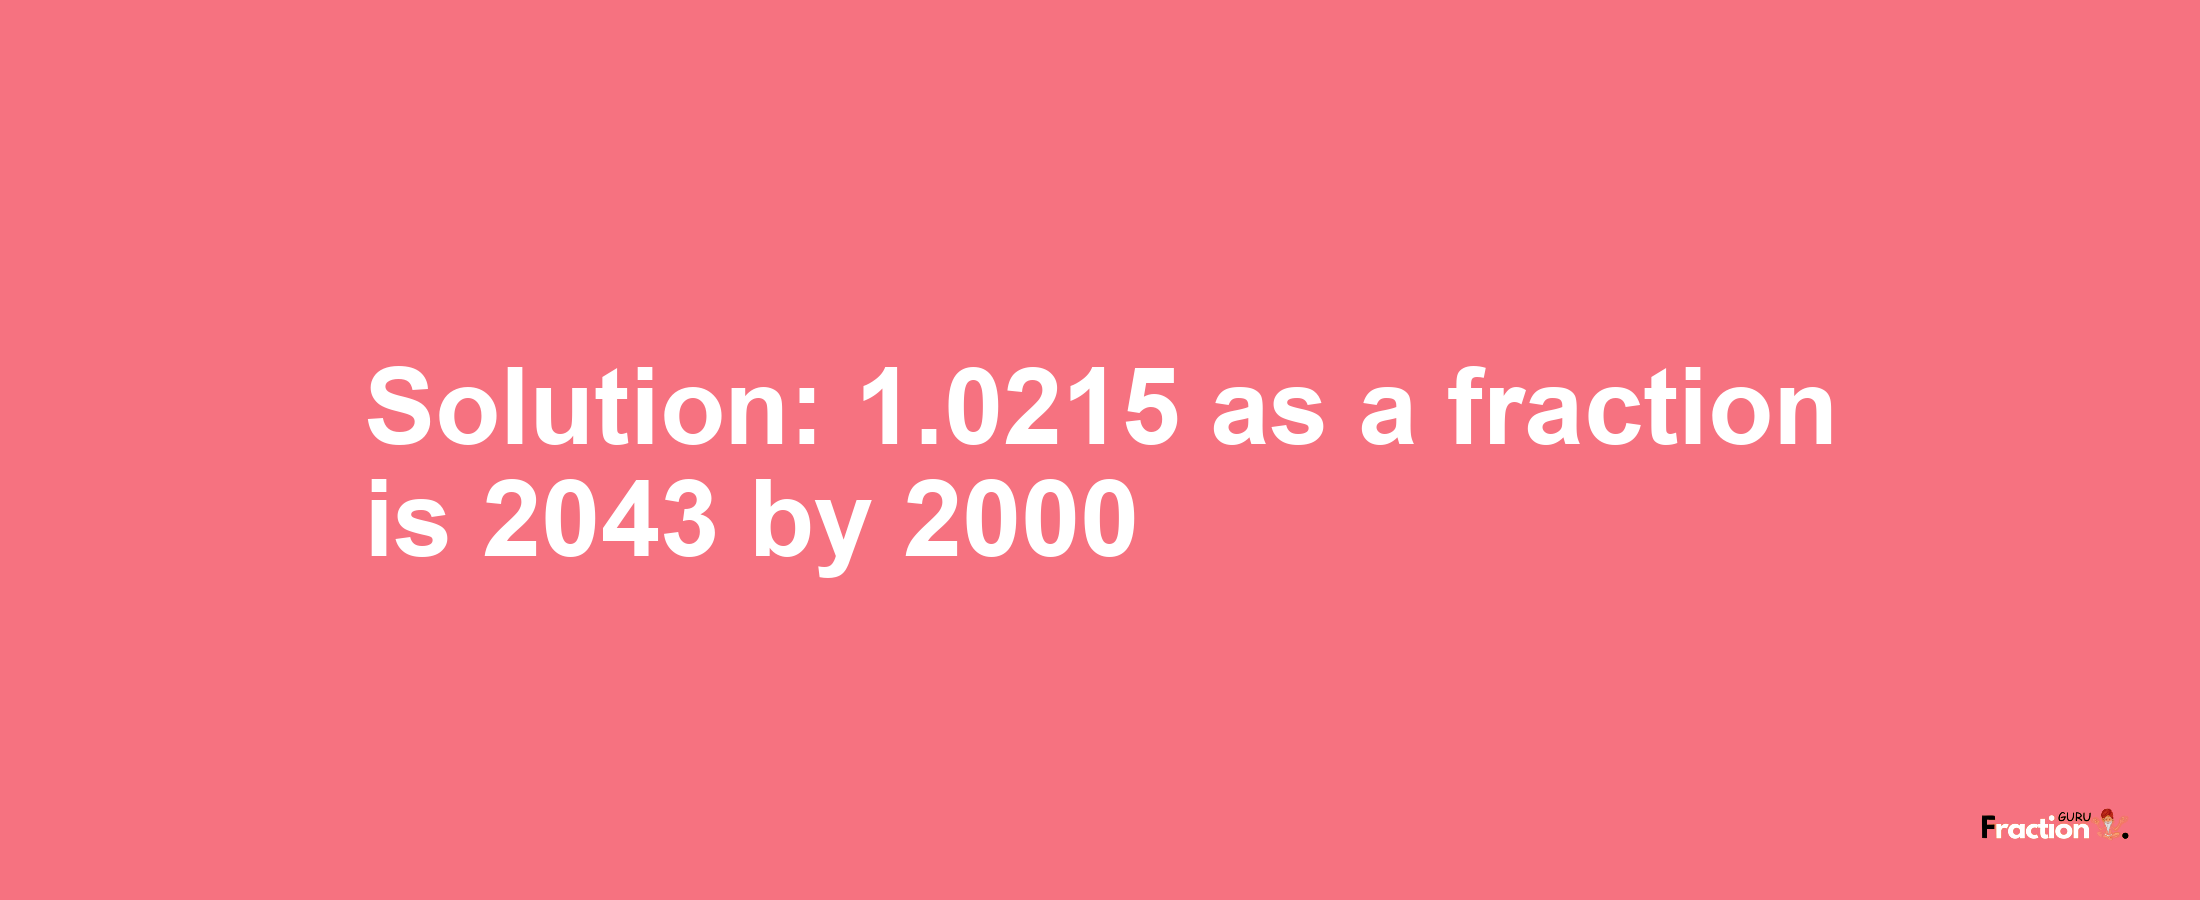 Solution:1.0215 as a fraction is 2043/2000